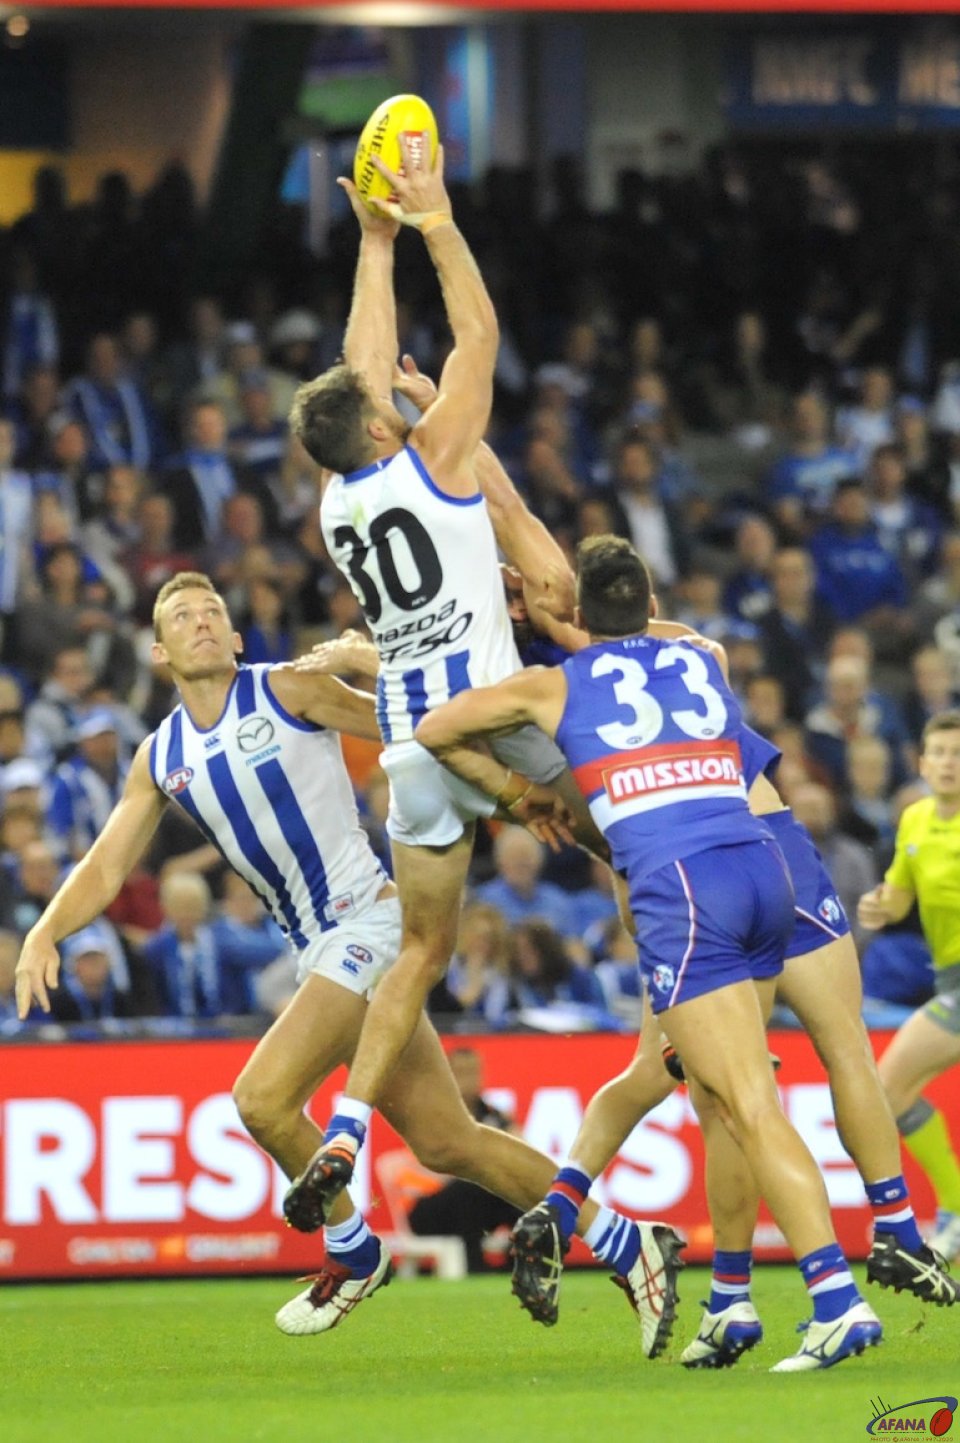 North's tall forwards outjumped the Dogs defence as Jarrad Waite outmarks them all